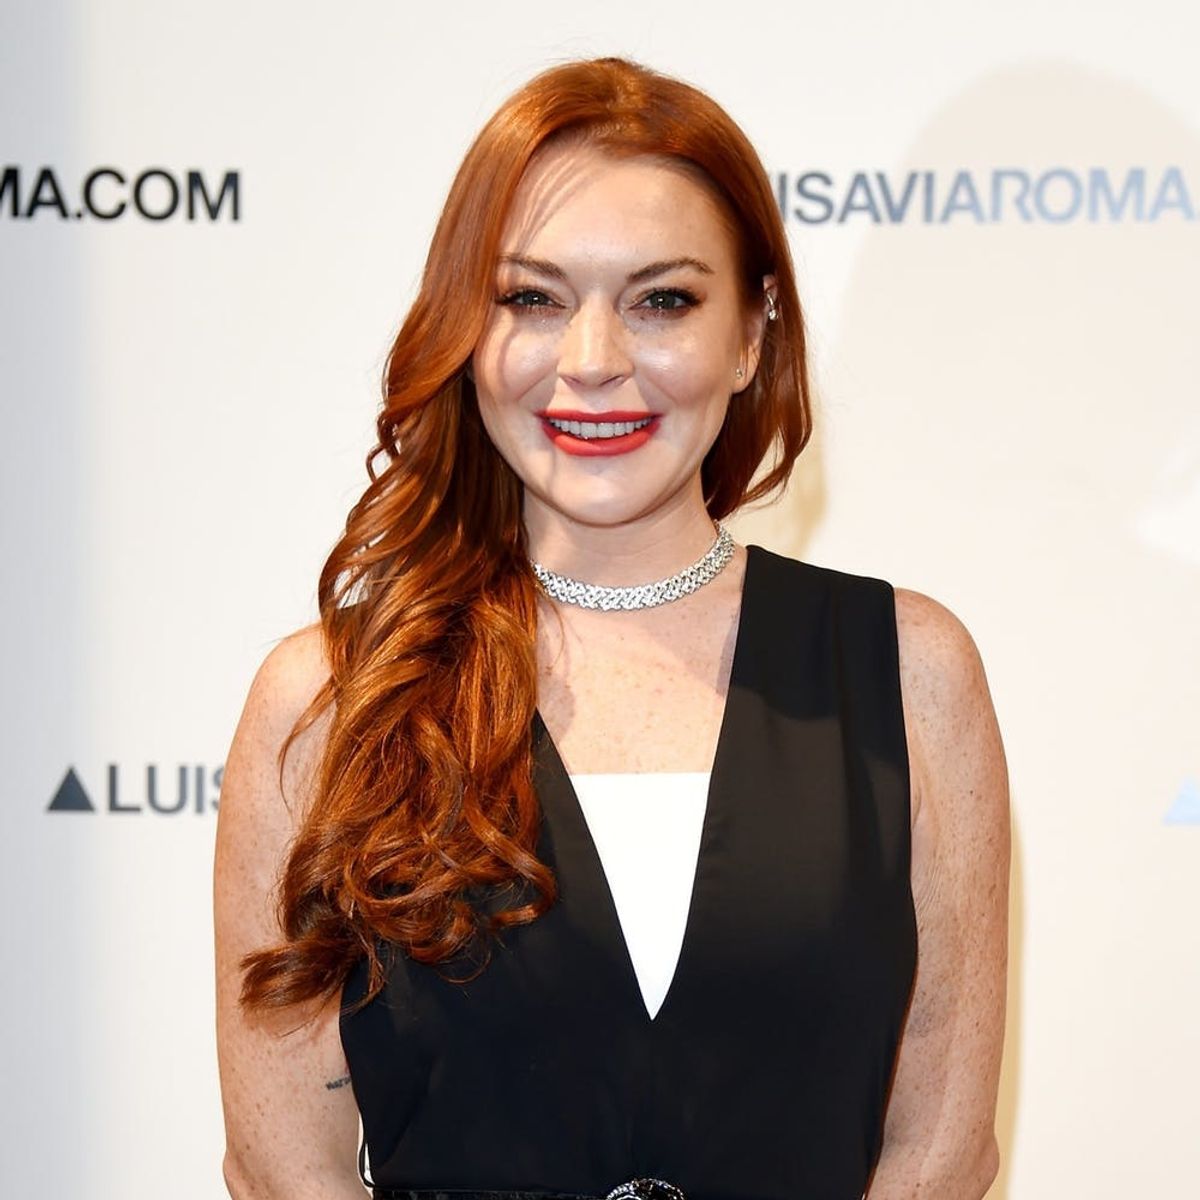 Lindsay Lohan Has Returned to Social Media With This Message for President Trump